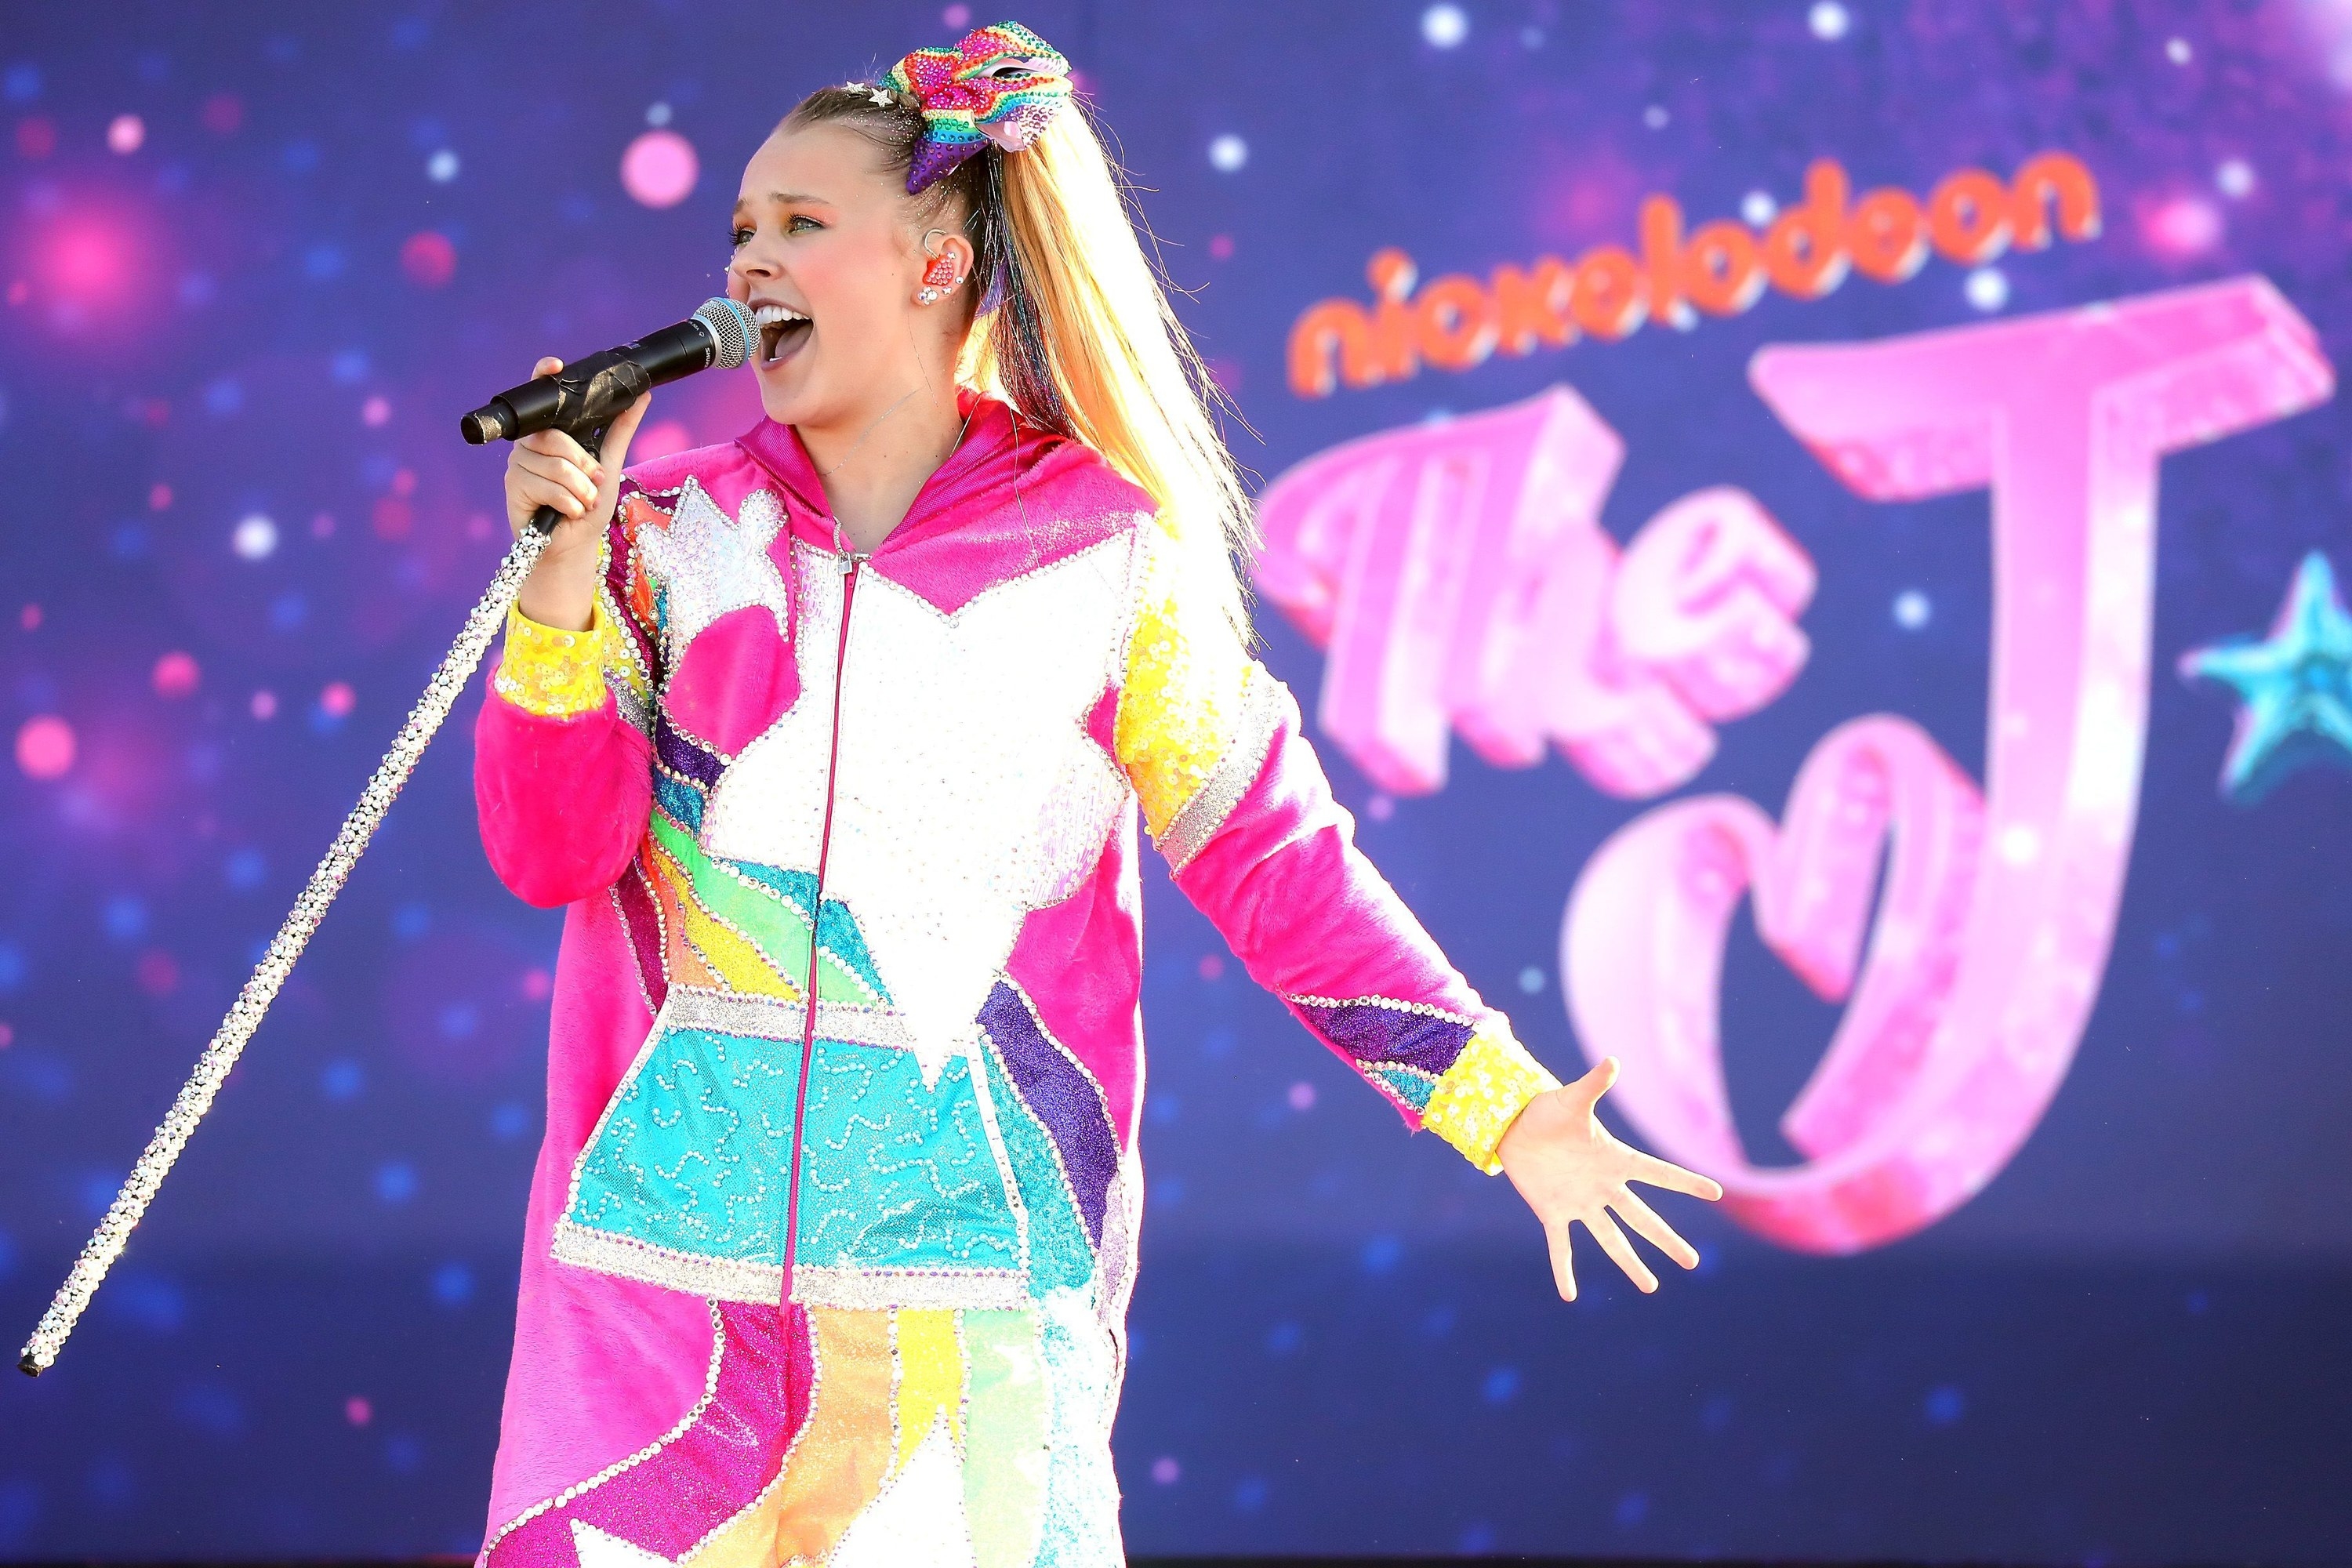 JoJo Siwa performing in a brightly colored outfit